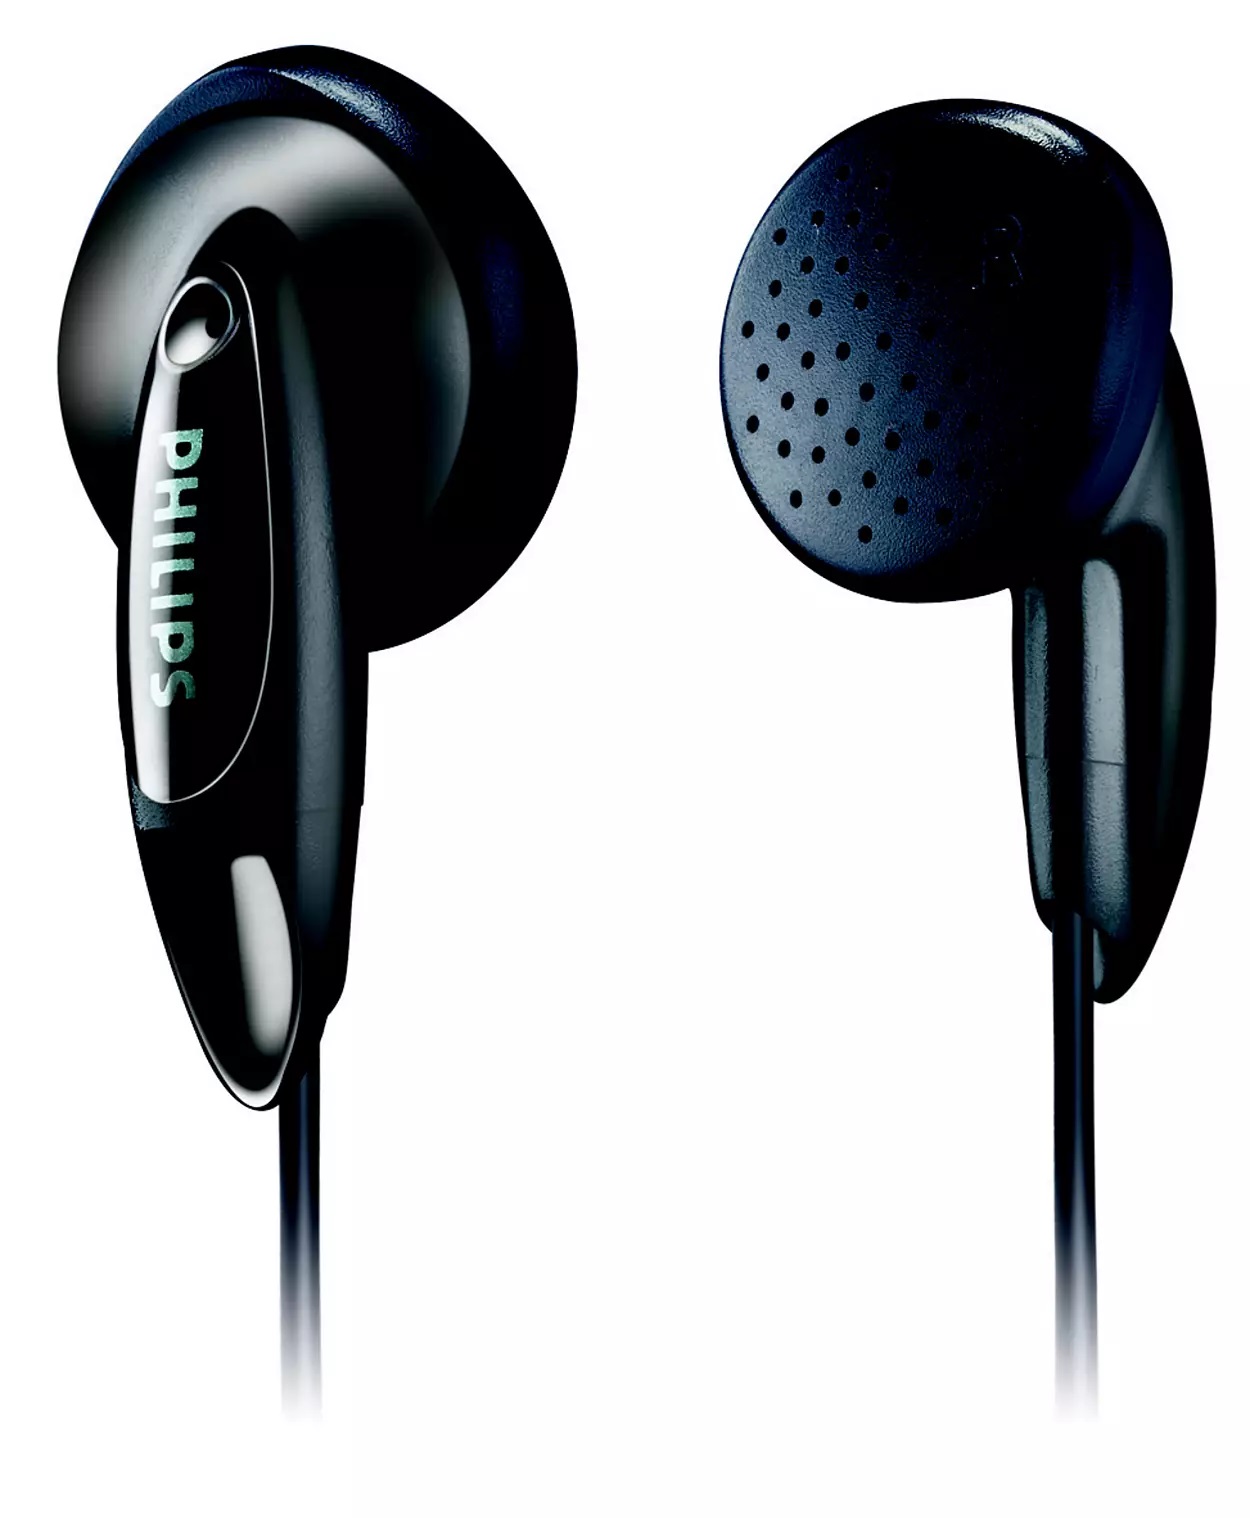 AURICULARES SONY CON CABLE MDR-ZX110P NEGROS - JACK 3.5mm - BMPrint